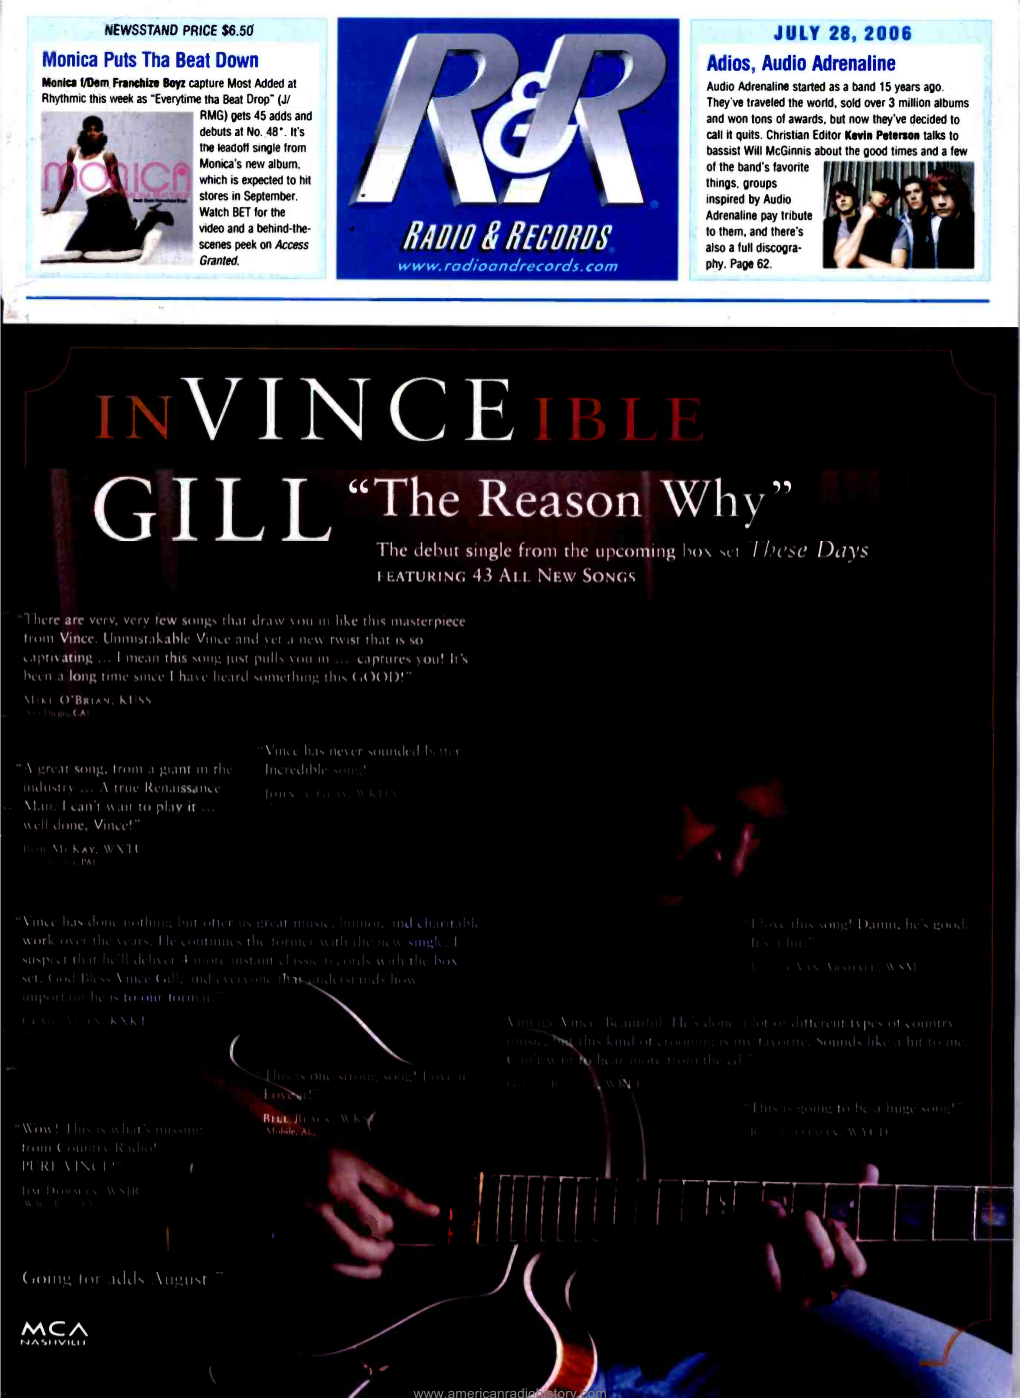 "The Reason Wh.R 11 L R GIL the Debut Single from the Upcoming Ix)\ ,T T / L C'se' Days FEATURING 43 ALL NEW SONGS